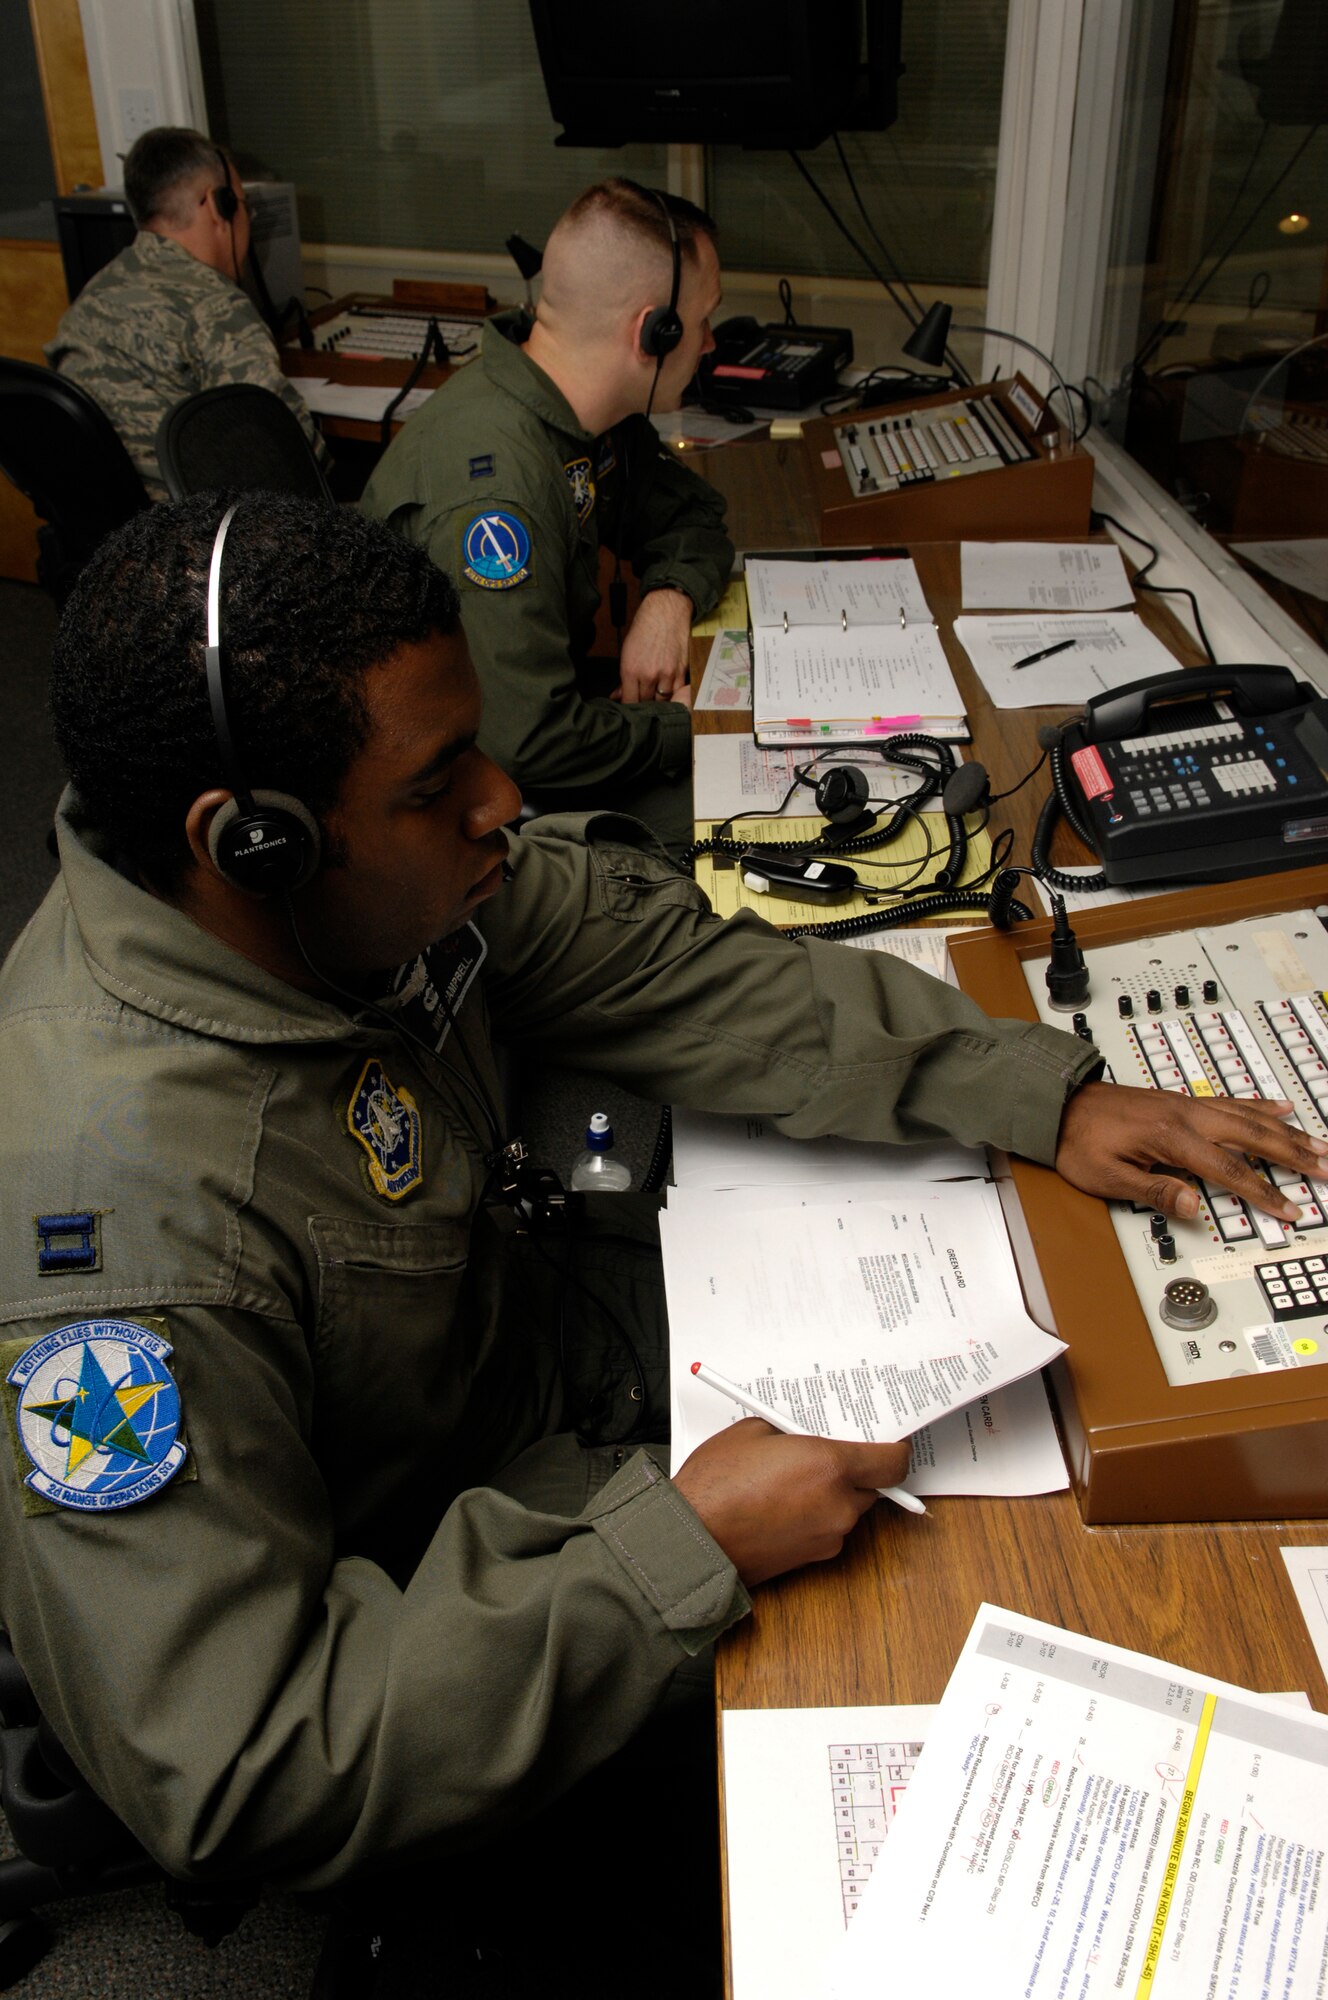 VANDENBERG AIR FORCE BASE, Calif. --  Capt. Mike Campbell, the assistant operations flight commander with the 2nd Range Operations Squadron here, runs the range operations commander simulation switch during a simulated launch March 10. Captain Campbell is an instructor for the 30th Operations Group Guardian Challenge team. The team will compete in Guardian Challenge on March 24-26. (U.S. Air Force photo/Airman 1st Class Christian Thomas)